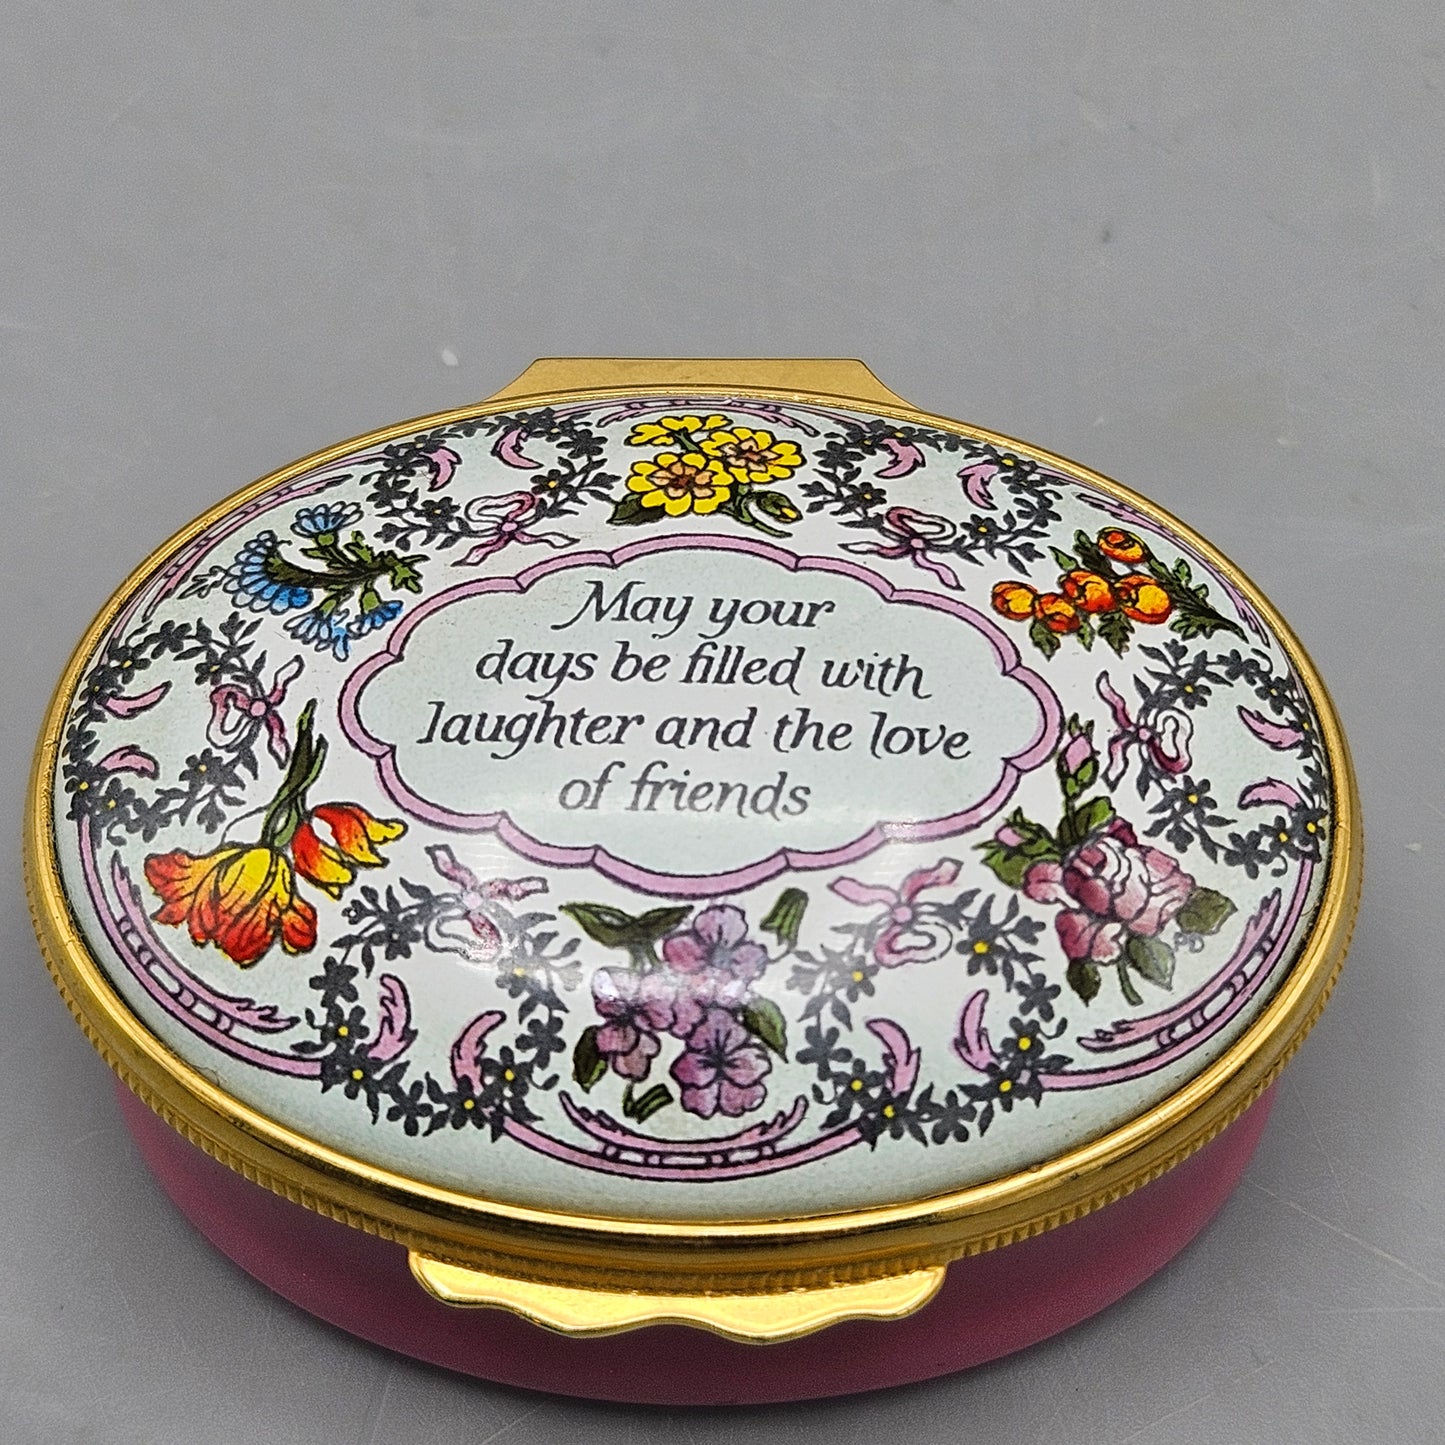 Vintage Halcyon Days May Your Days Be Filled with Laughter & the Love of Friends Trinket Box